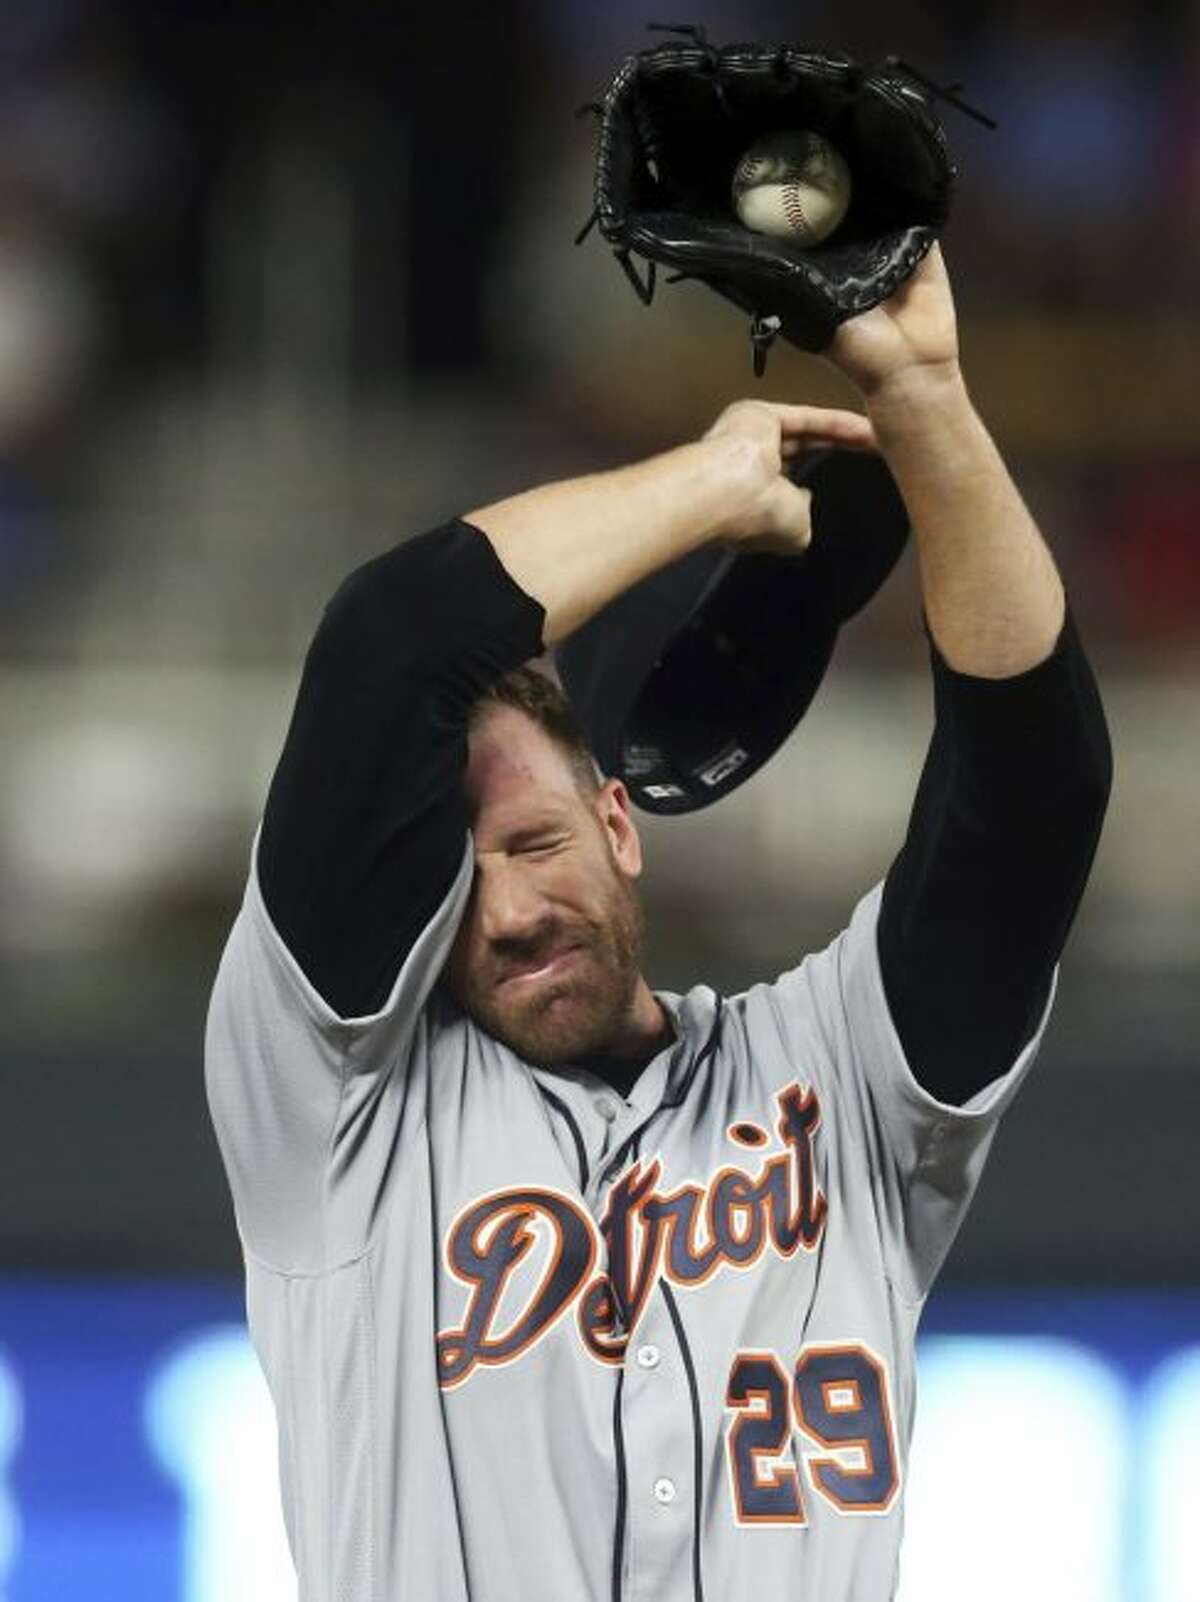 Detroit Tigers pitcher Zach McAllister wipes his face after giving up a hit to Minnesota Twins’ Logan Forsythe during the sixth inning of a baseball game on Thursday, in Minneapolis. McAllister had gifen up a two-run home run to Ehire Adrianza moments before. (AP Photo/Jim Mone)